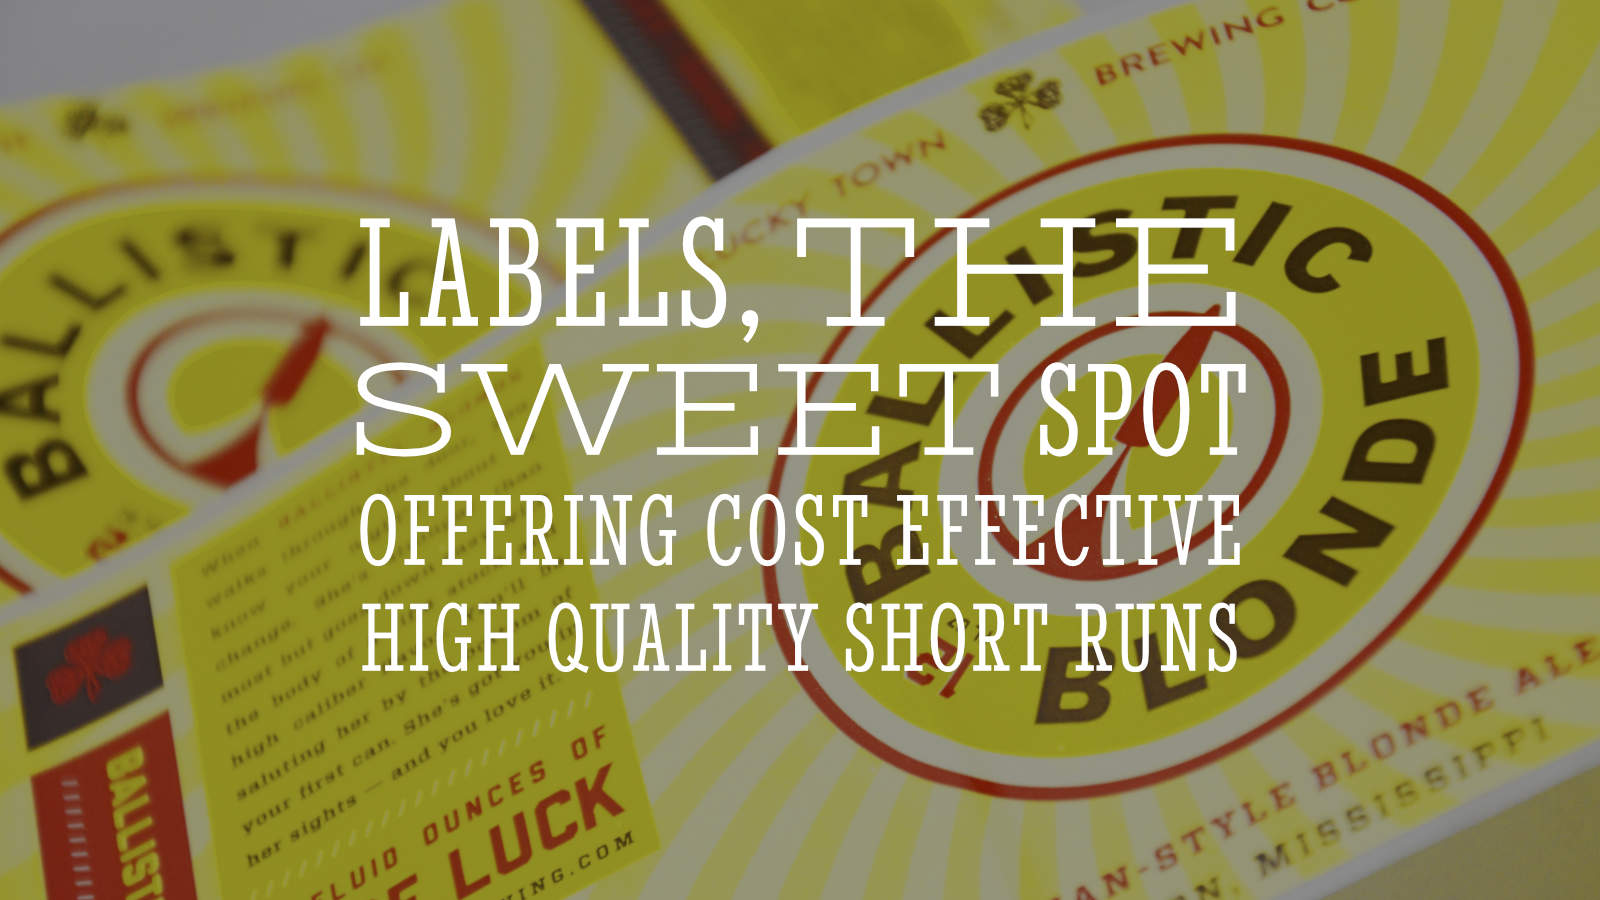 Labels, the sweet spot